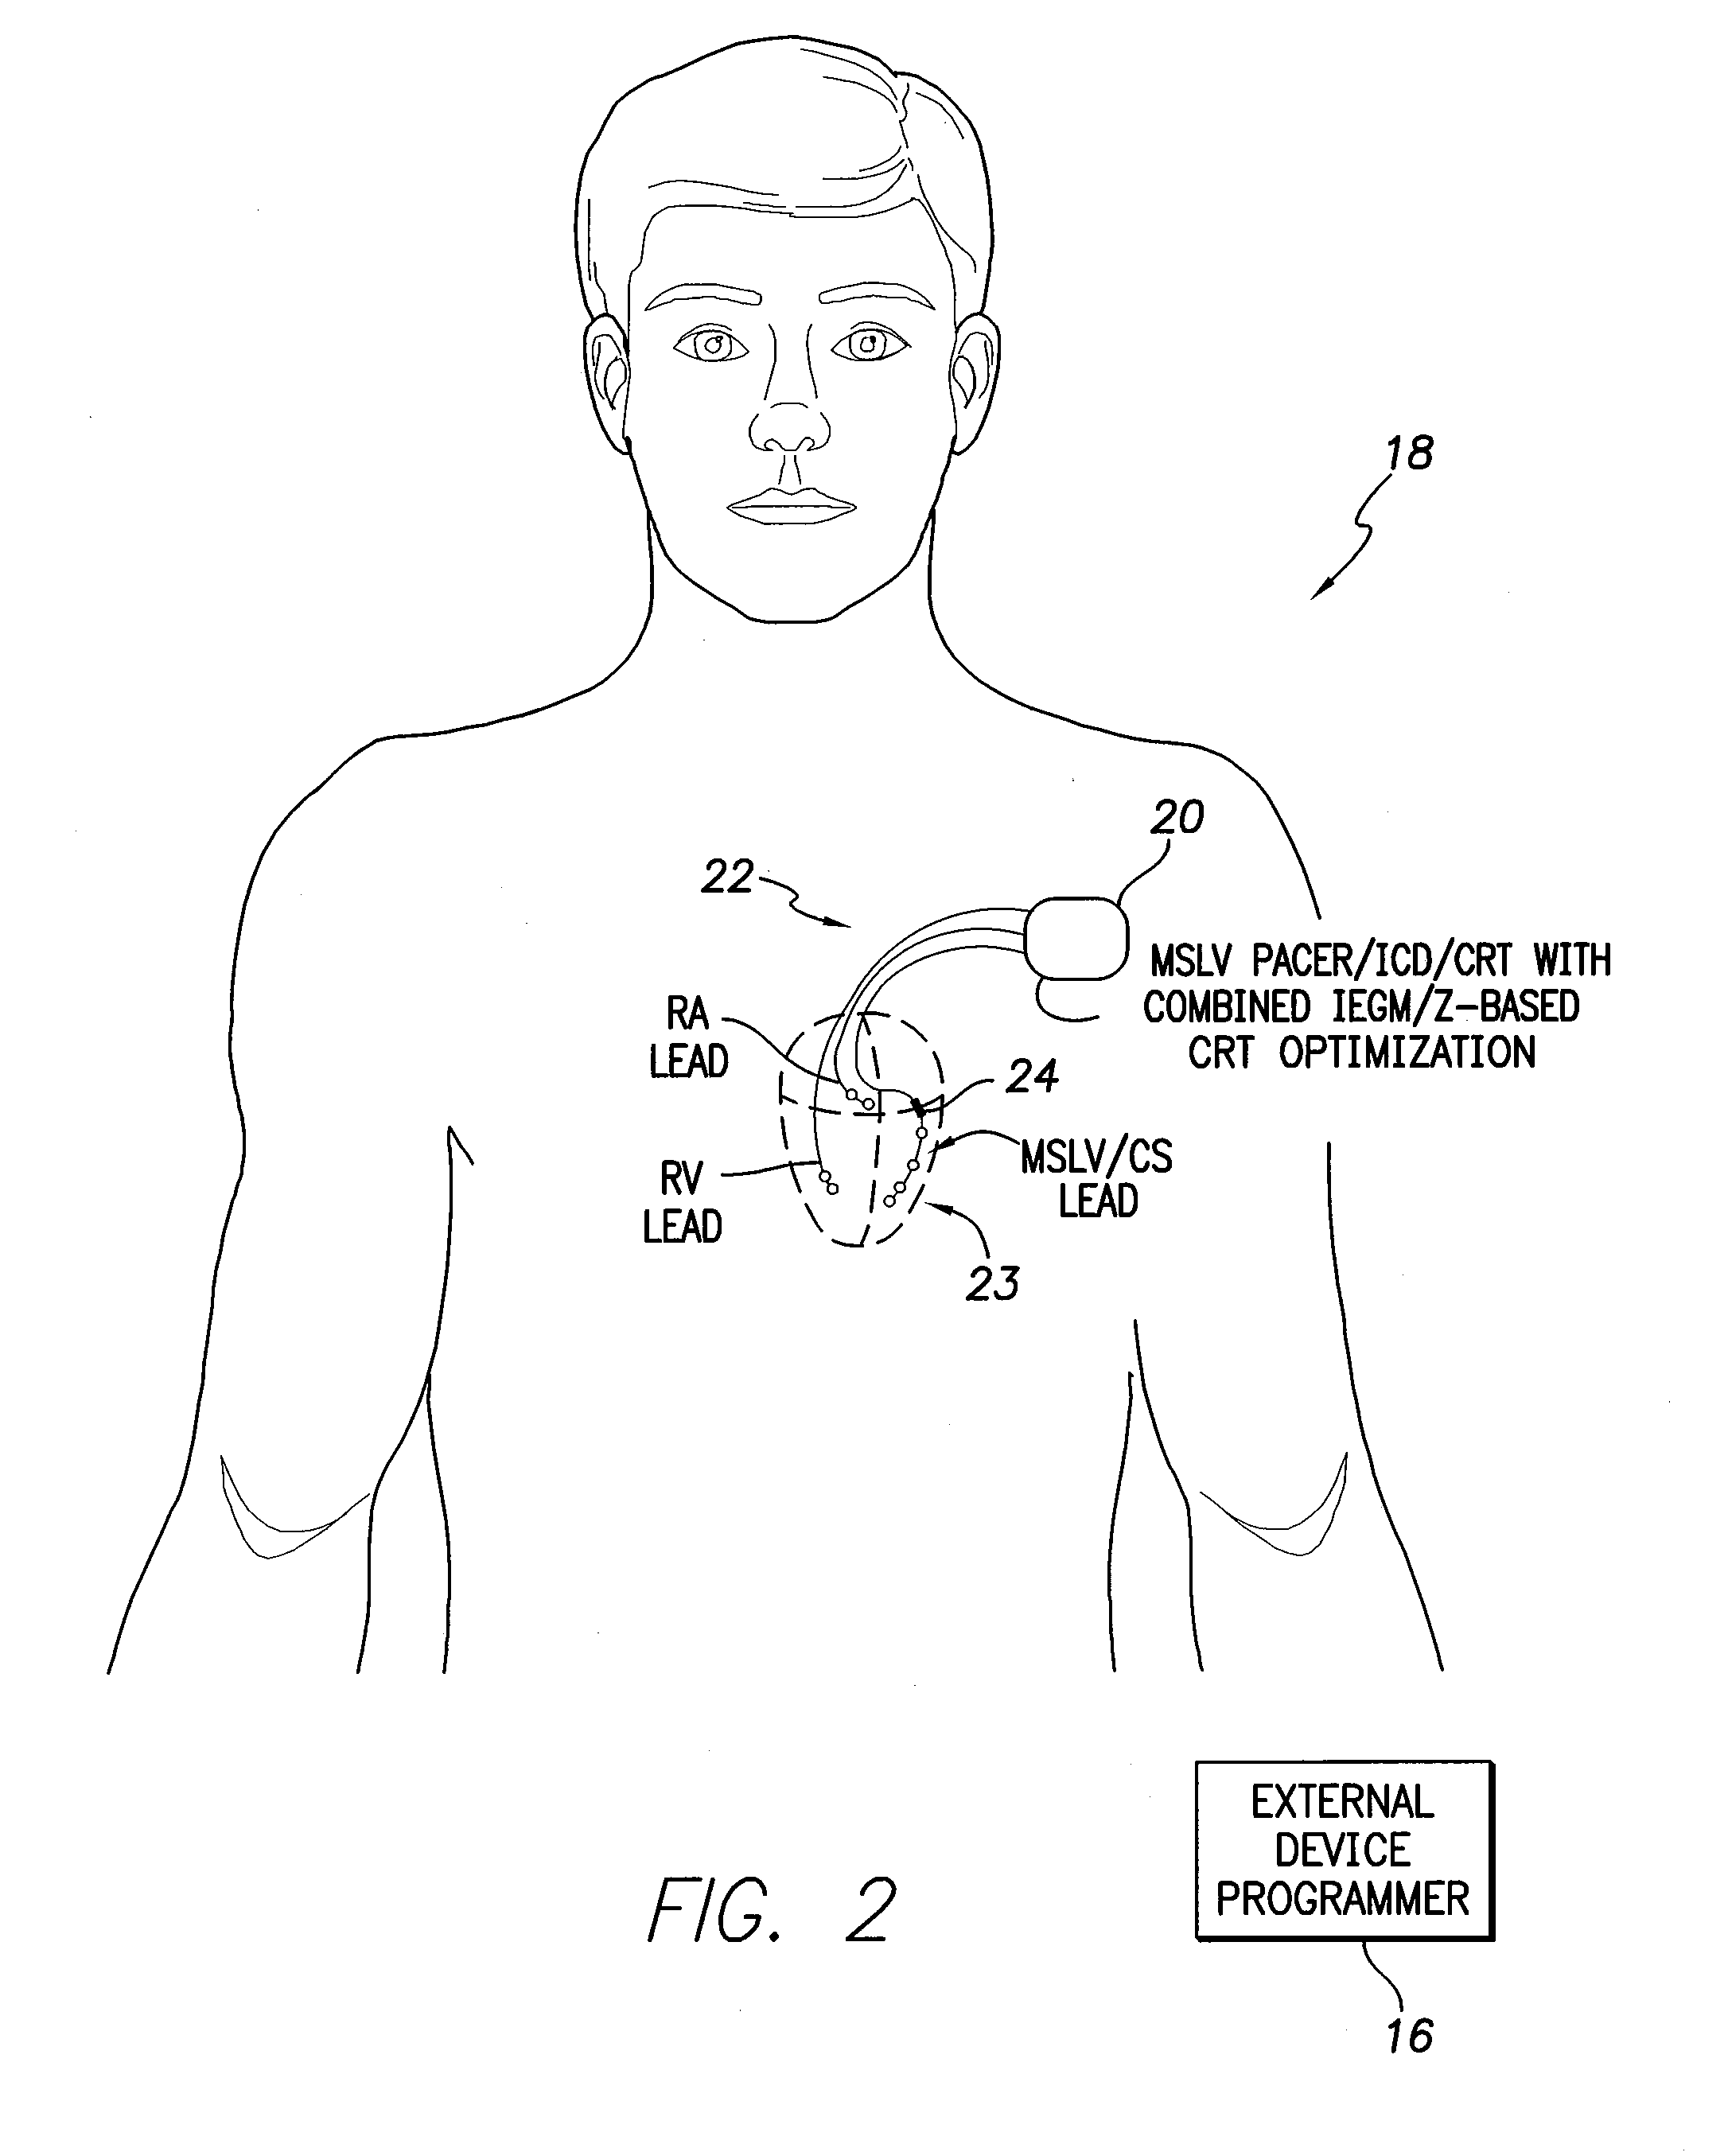 Systems and methods for optimizing AV/VV pacing delays using combined IEGM/impedance-based techniques for use with implantable medical devices